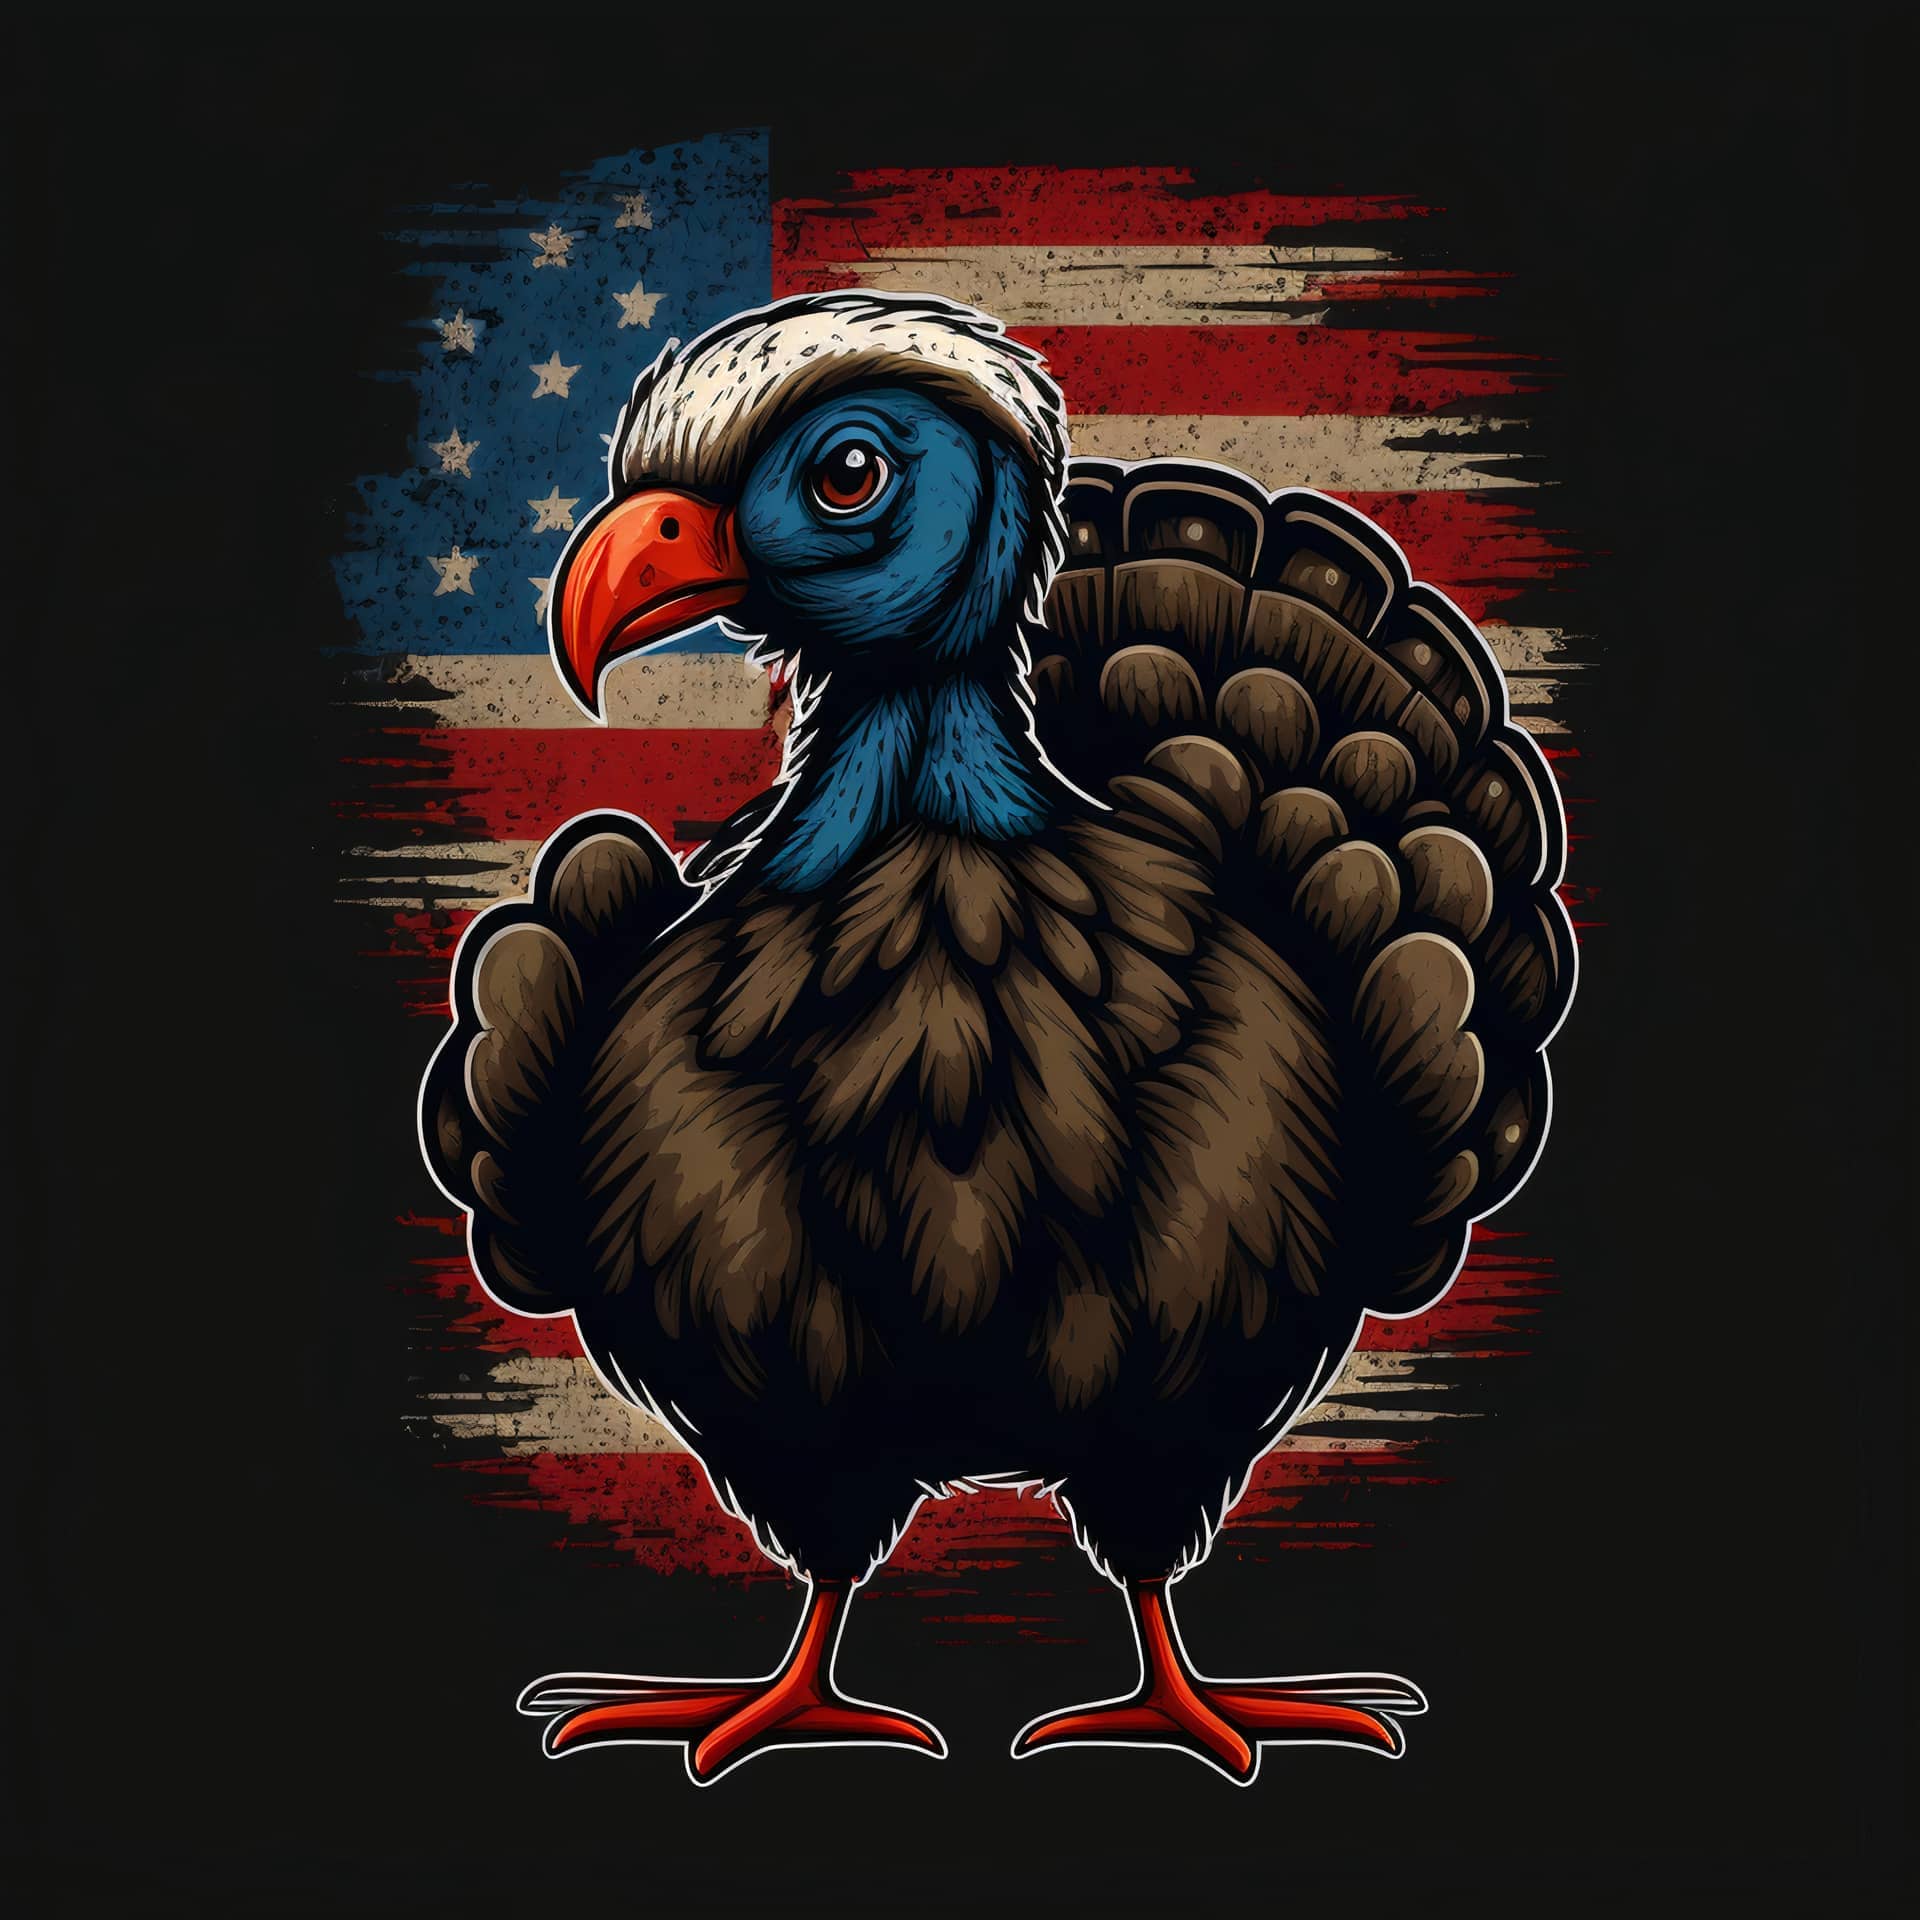 Turkey design with american flag image